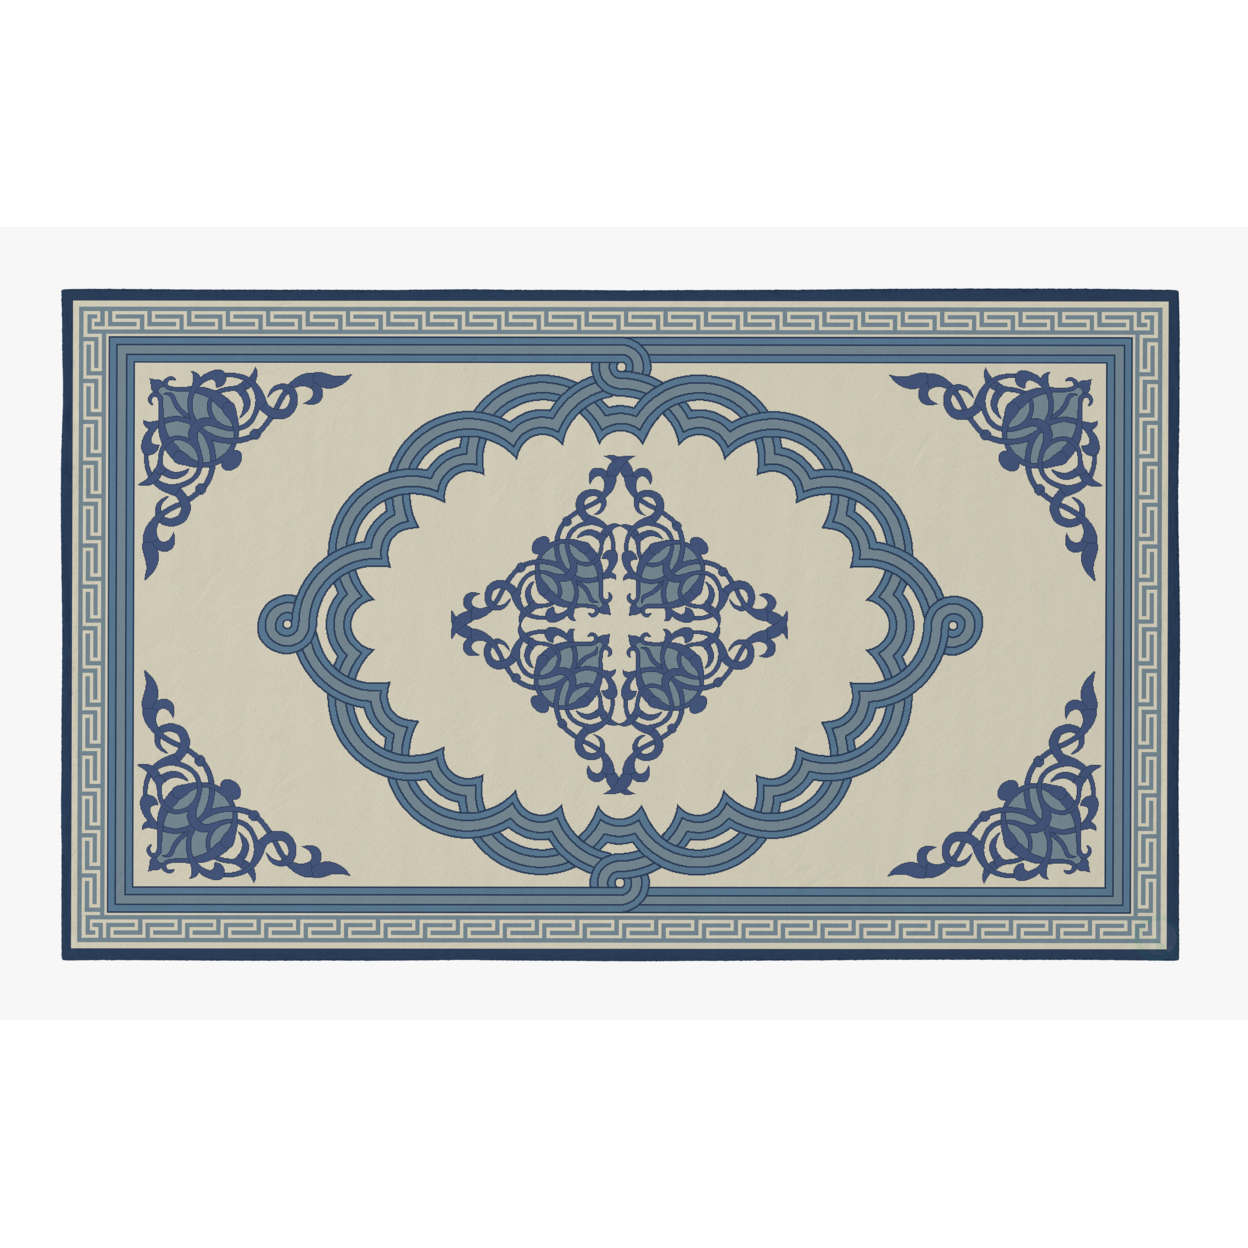 Deerlux Transitional Living Room Area Rug With Nonslip Backing, Blue Medallion Pattern - 3 X 5